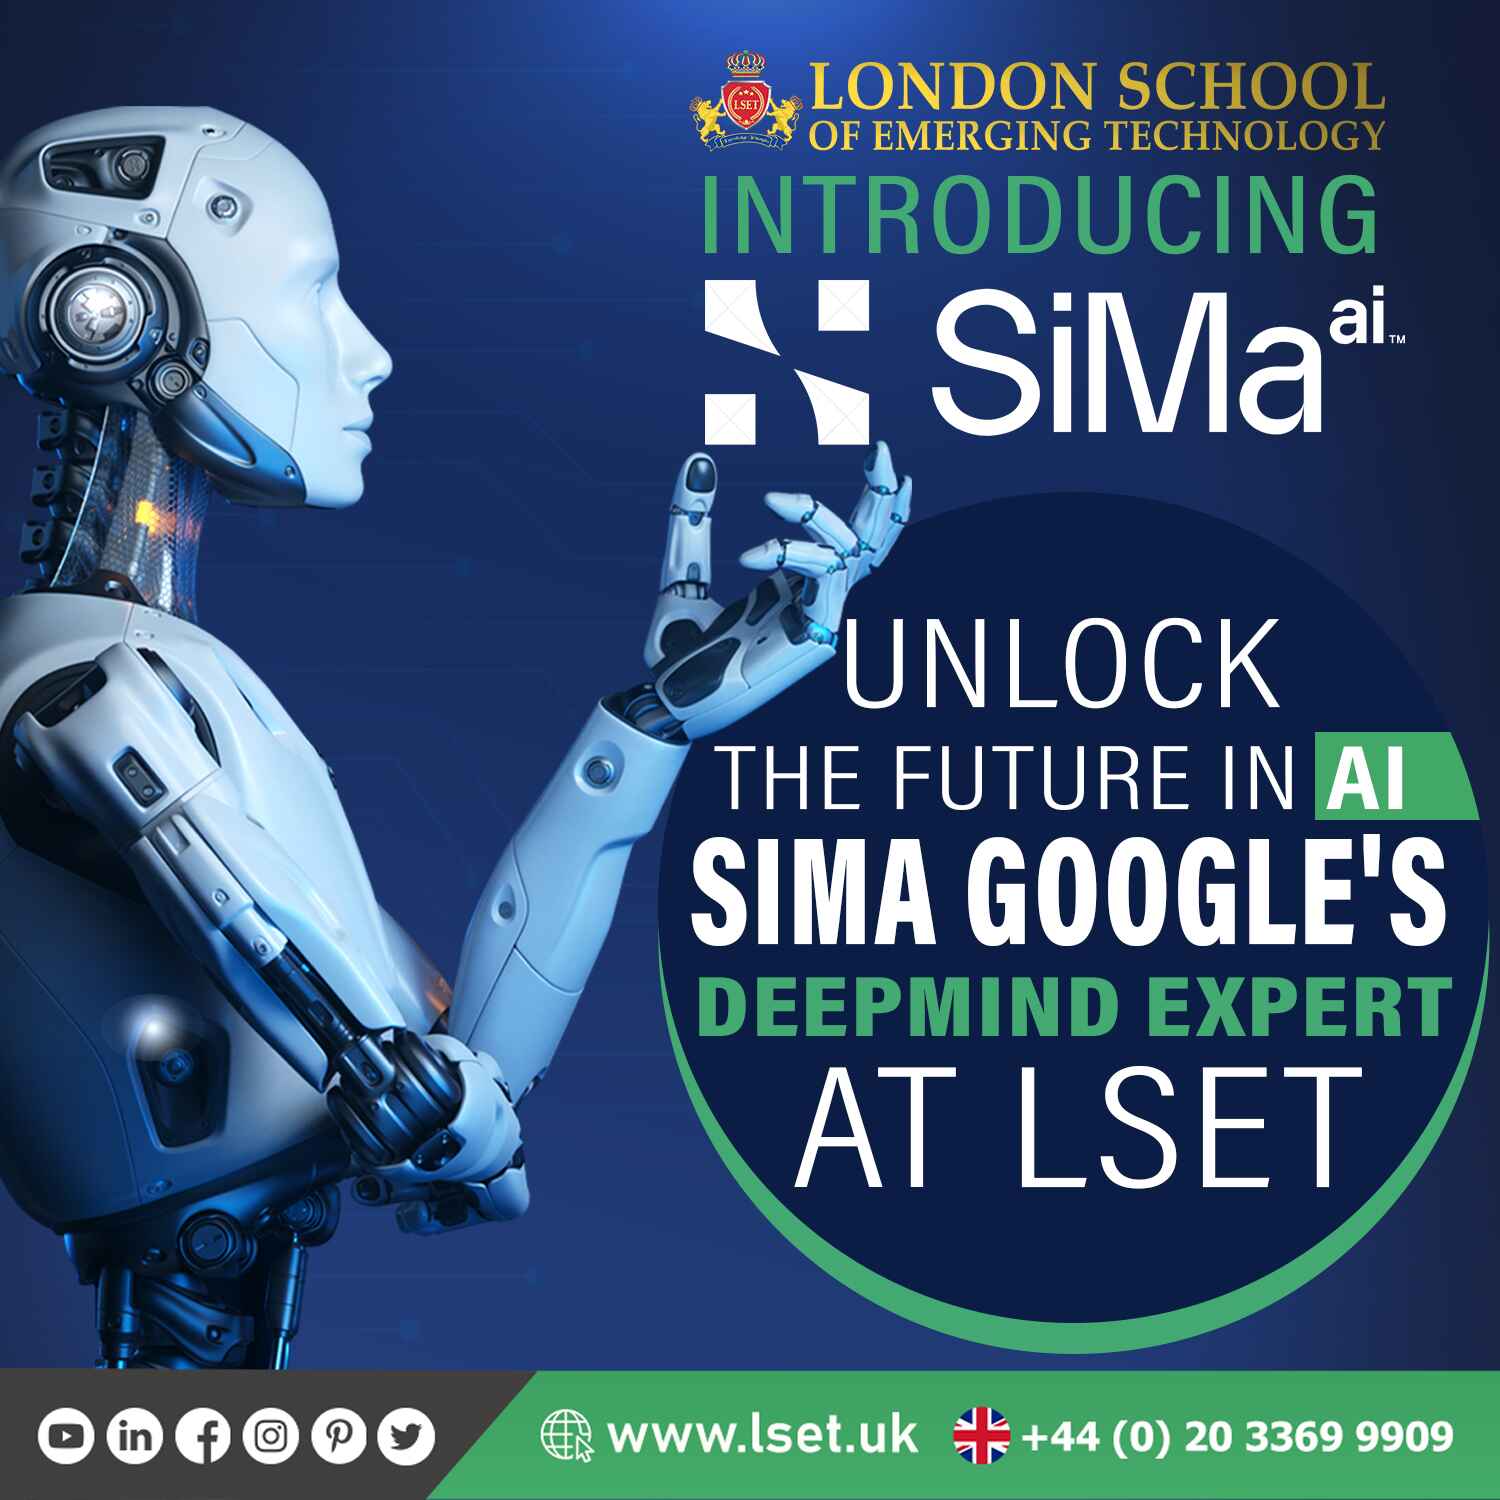 London School of Emerging Technology Announces New Expert-Led Series on Advanced AI Innovations